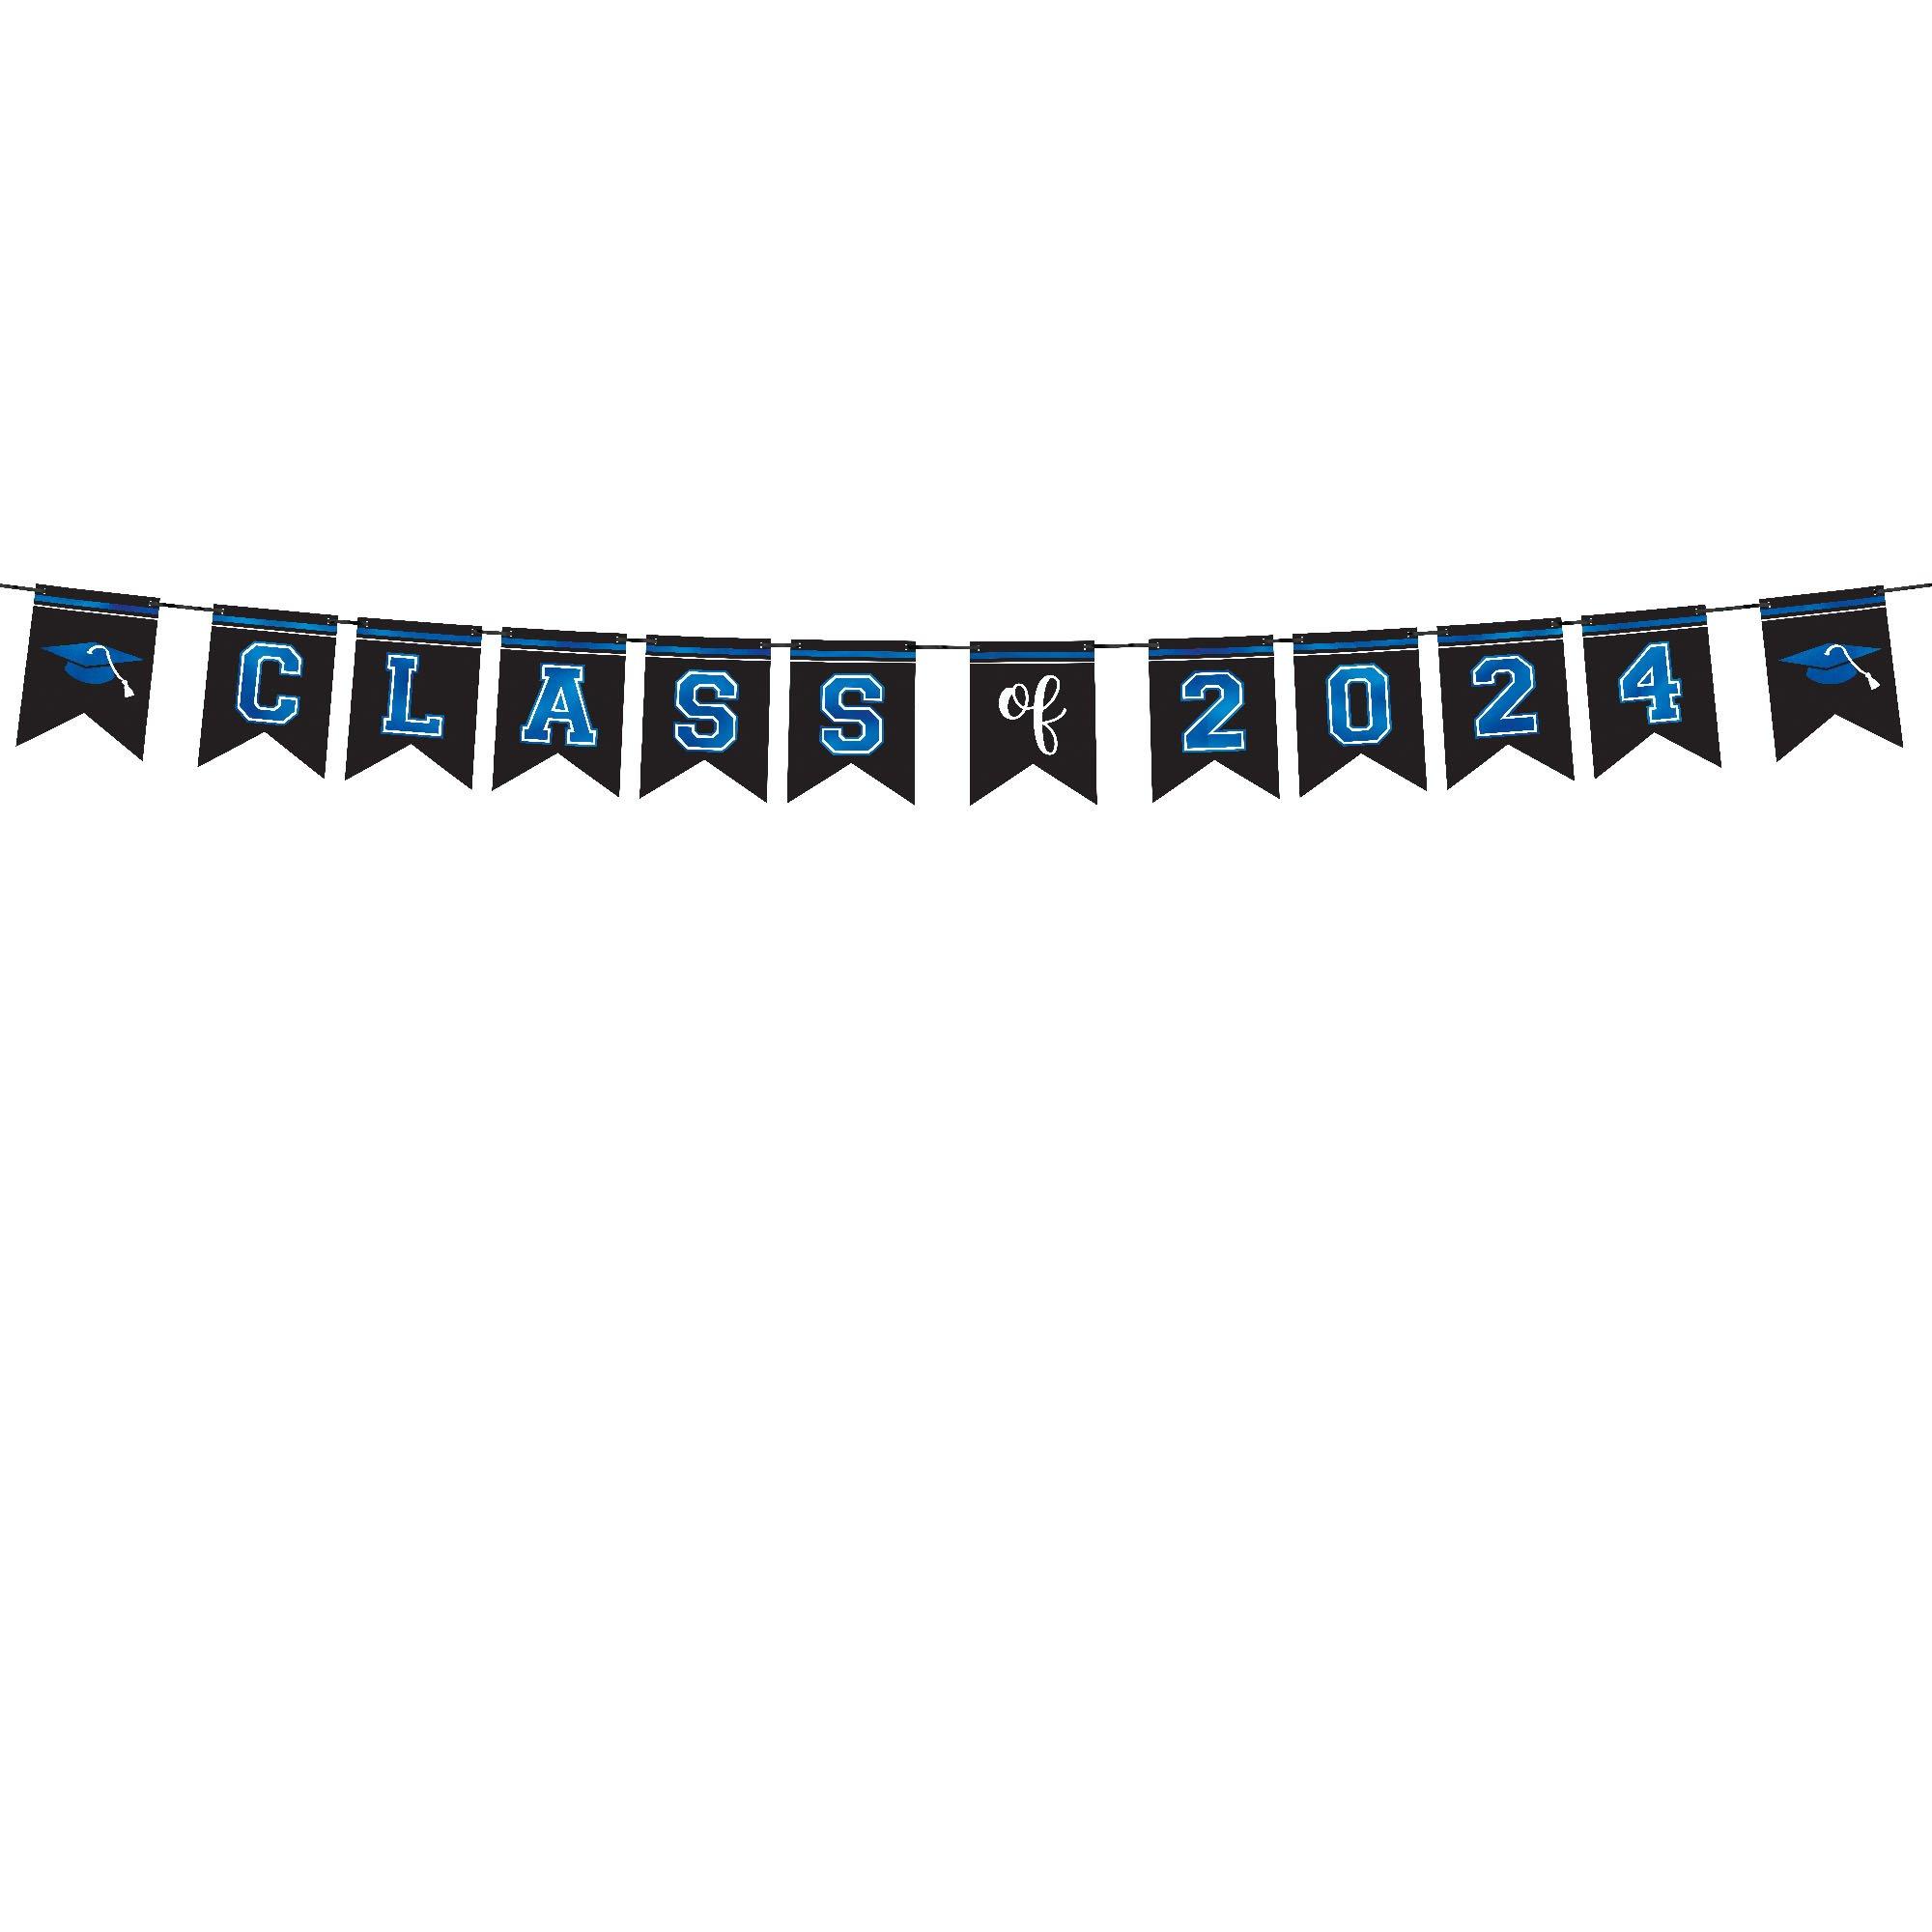 Class of 2023 Graduation Cardstock Pennant Banner, 12ft